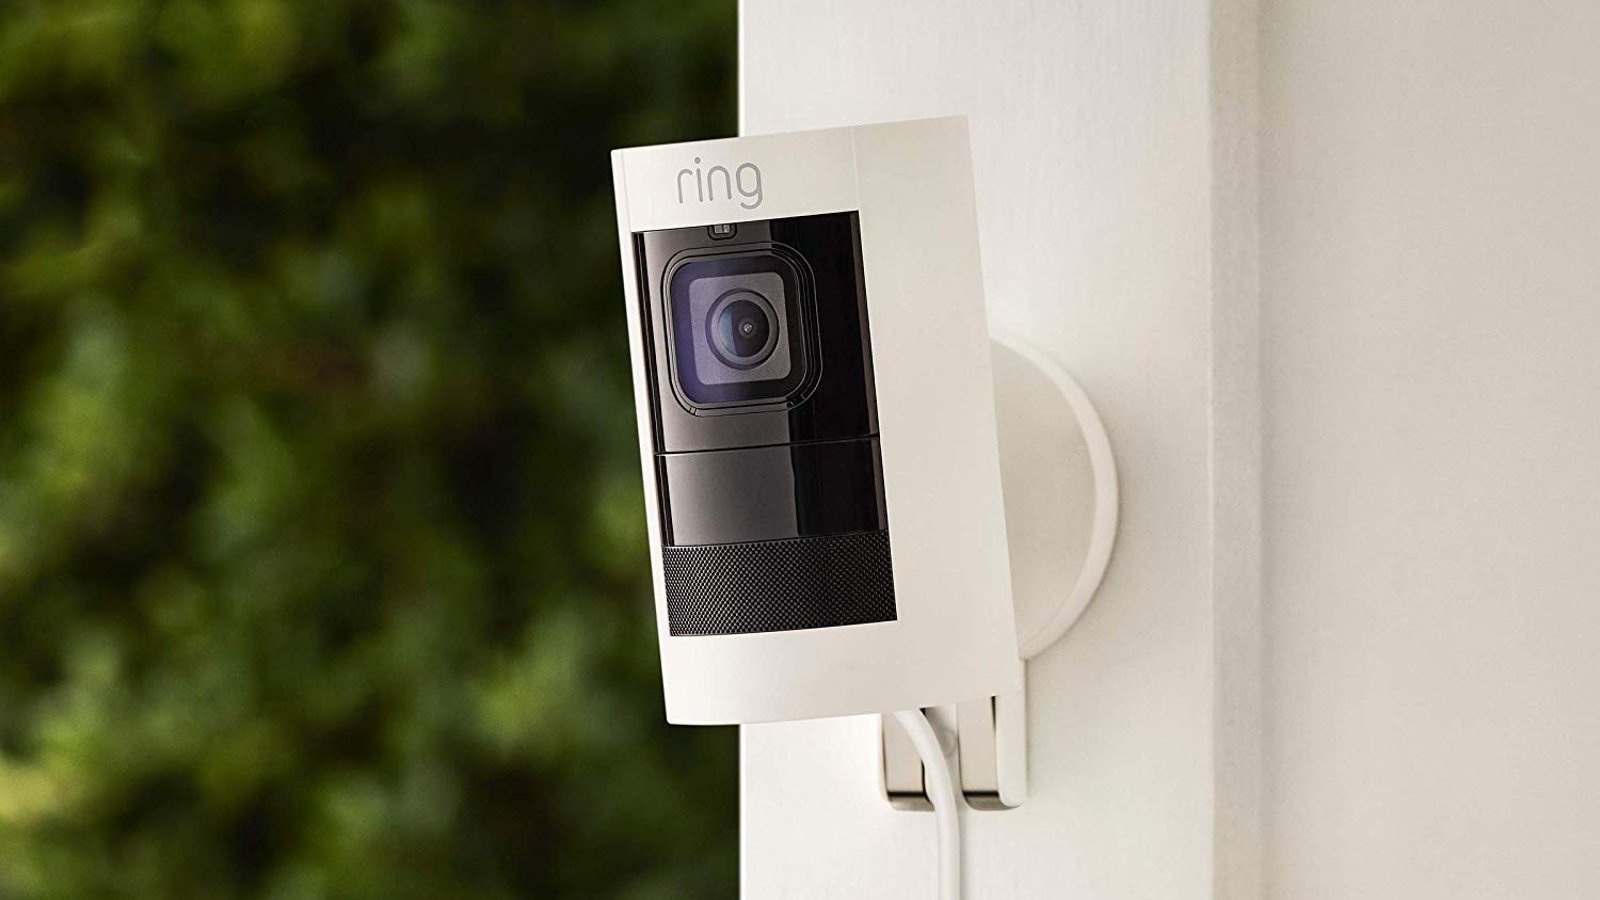 Ring Stick Up Cam mounted on the exterior wall of a house